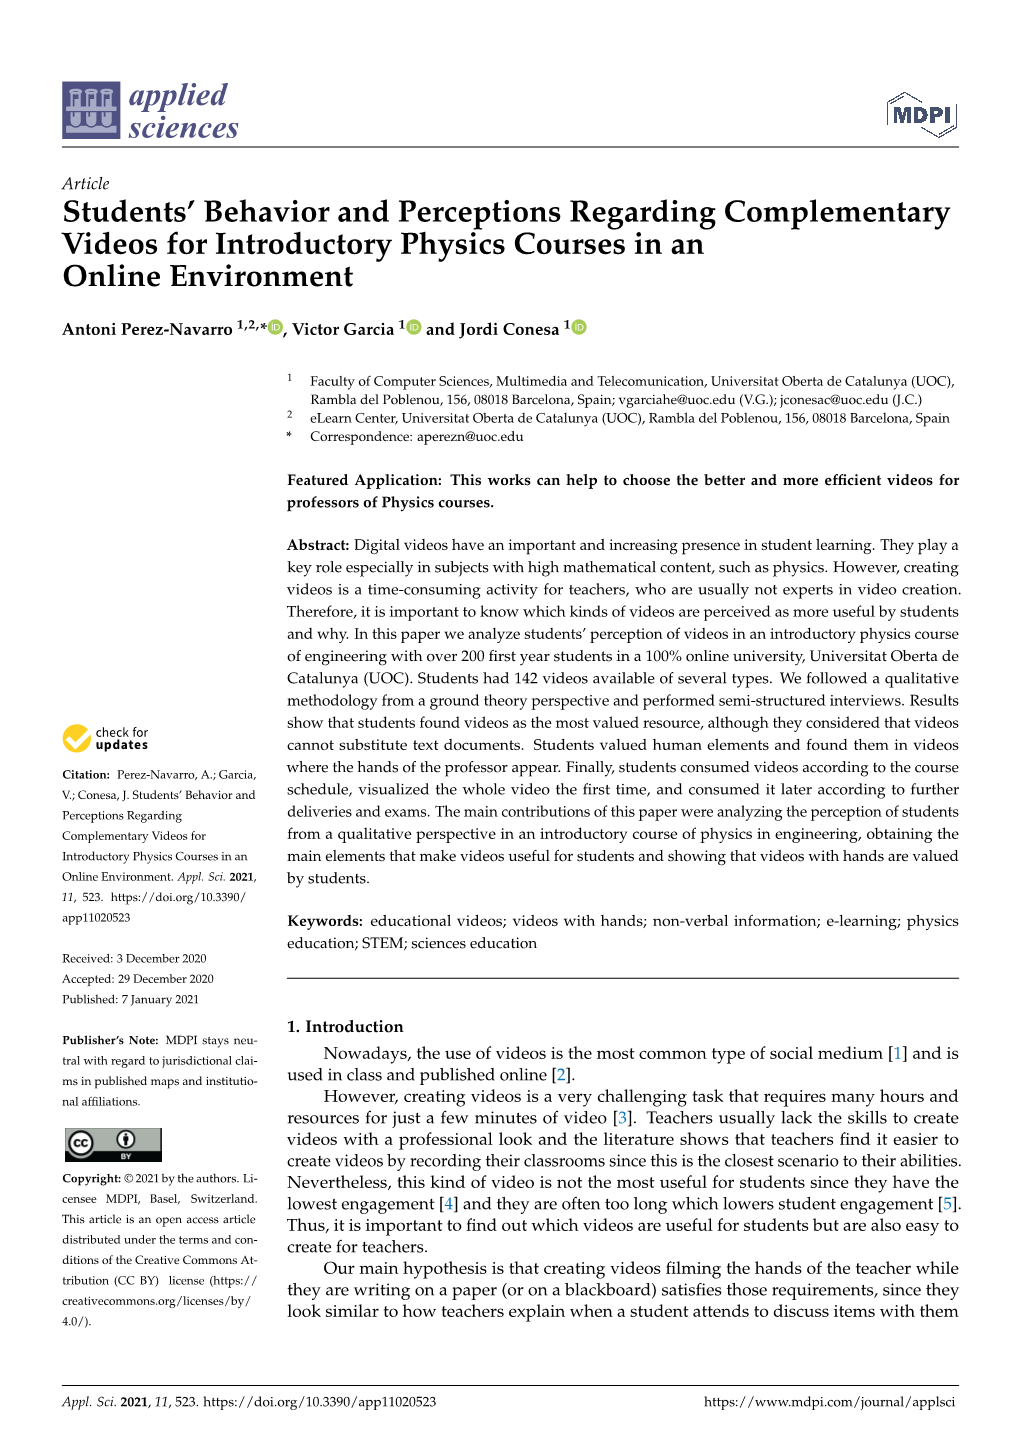 Students' Behavior and Perceptions Regarding Complementary Videos